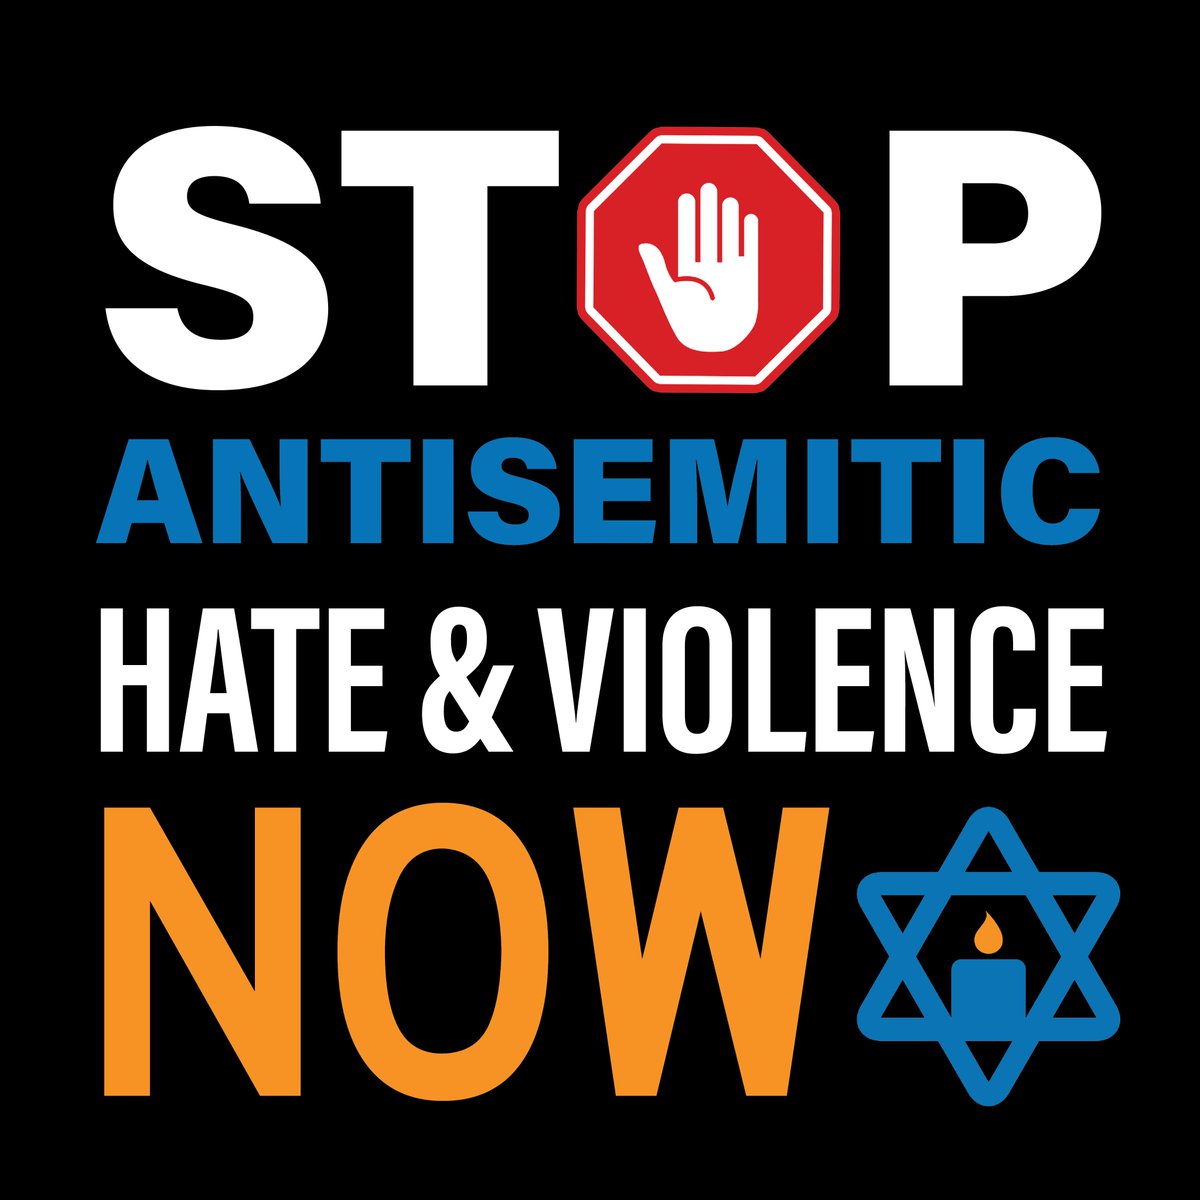 The Senate Republican Conference pushed for the consideration of S.7773, the 'Dismantling Student Antisemitism Act', which would require mandatory sensitivity training in higher education institutions to include the topic of antisemitism & require incidents of hate & antisemitism